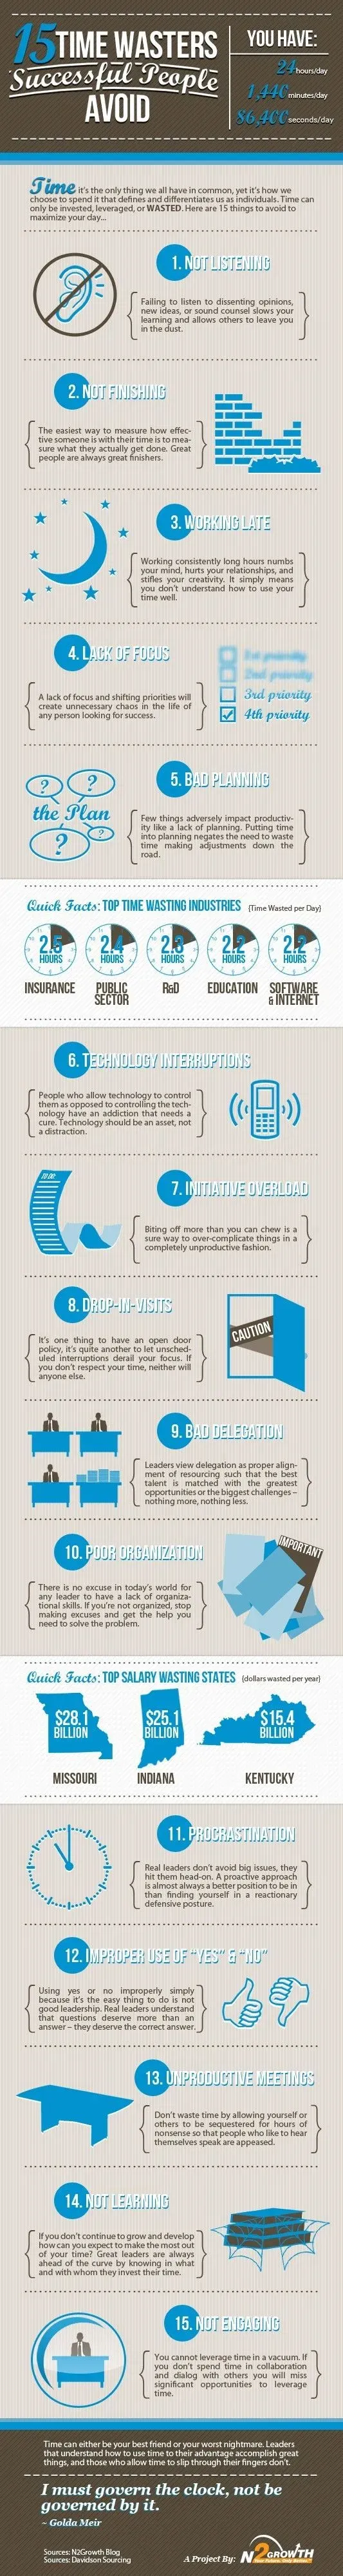 15+ Time Waster you should Avoid to Become Successful | All Infographics: 